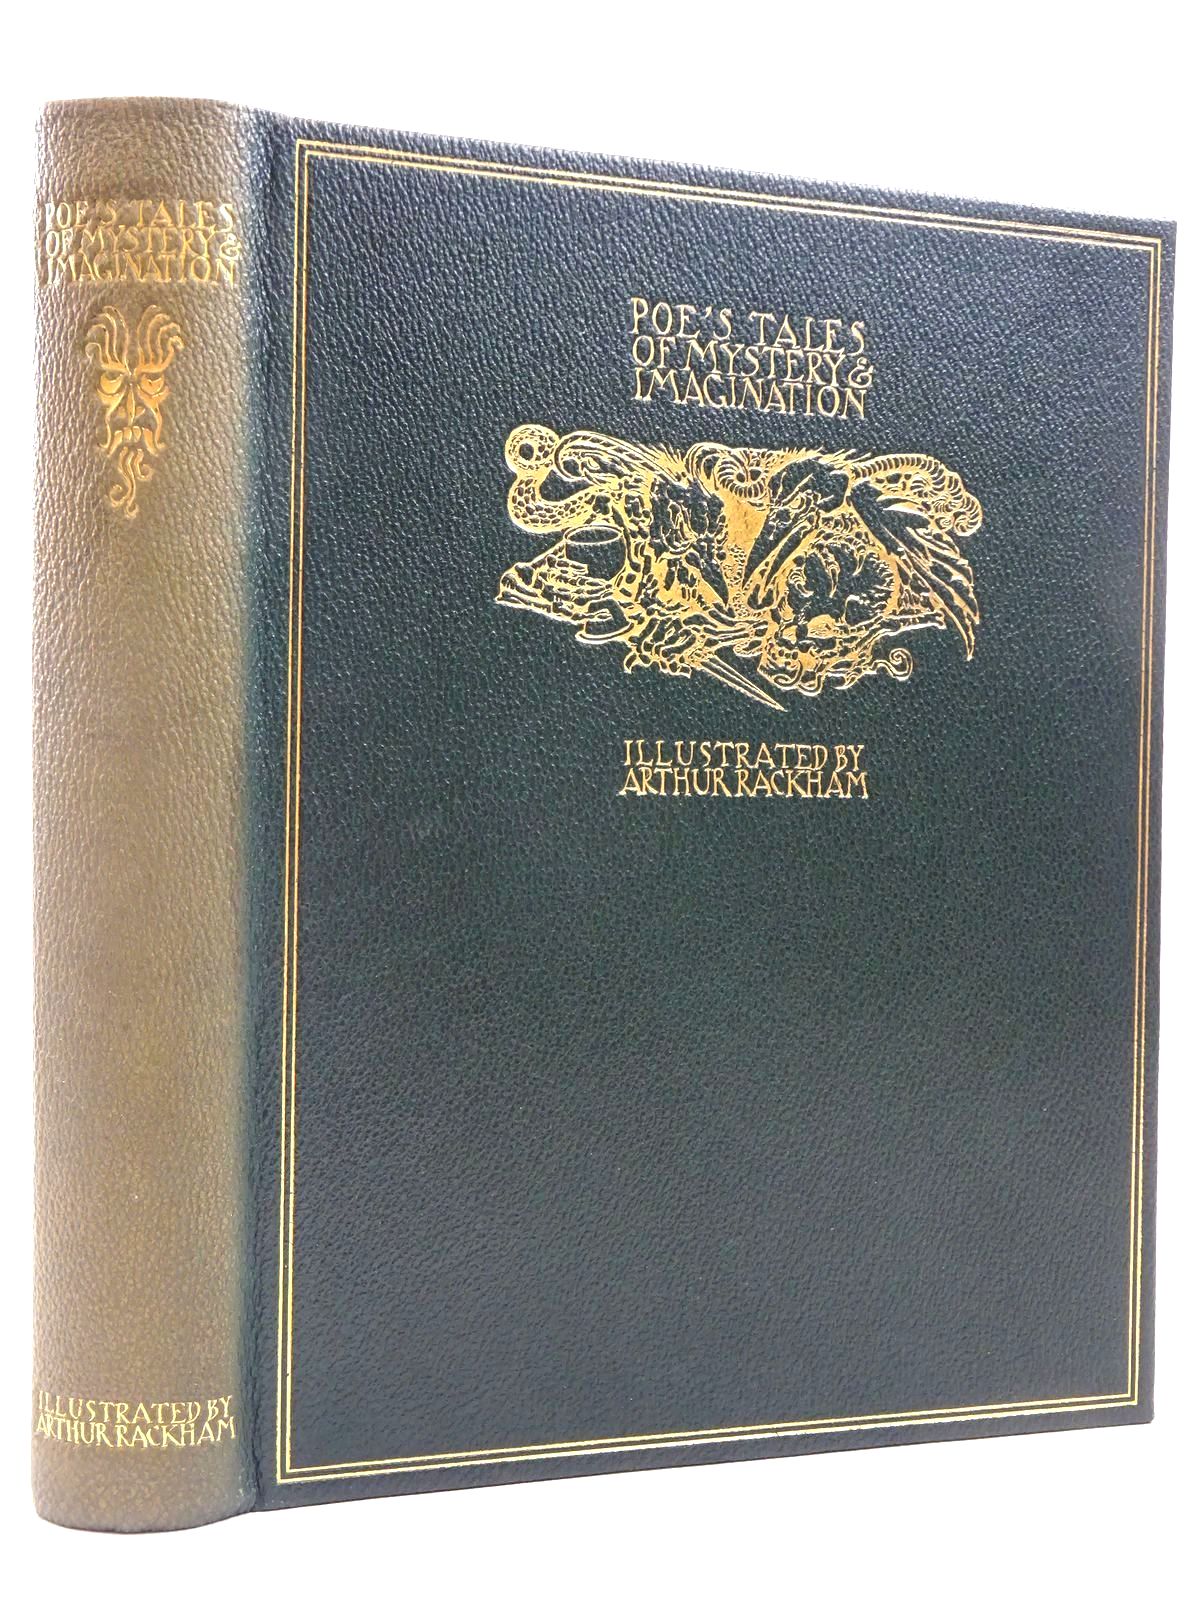 Photo of POE'S TALES OF MYSTERY AND IMAGINATION written by Poe, Edgar Allan illustrated by Rackham, Arthur published by George G. Harrap &amp; Co. Ltd. (STOCK CODE: 2129024)  for sale by Stella & Rose's Books